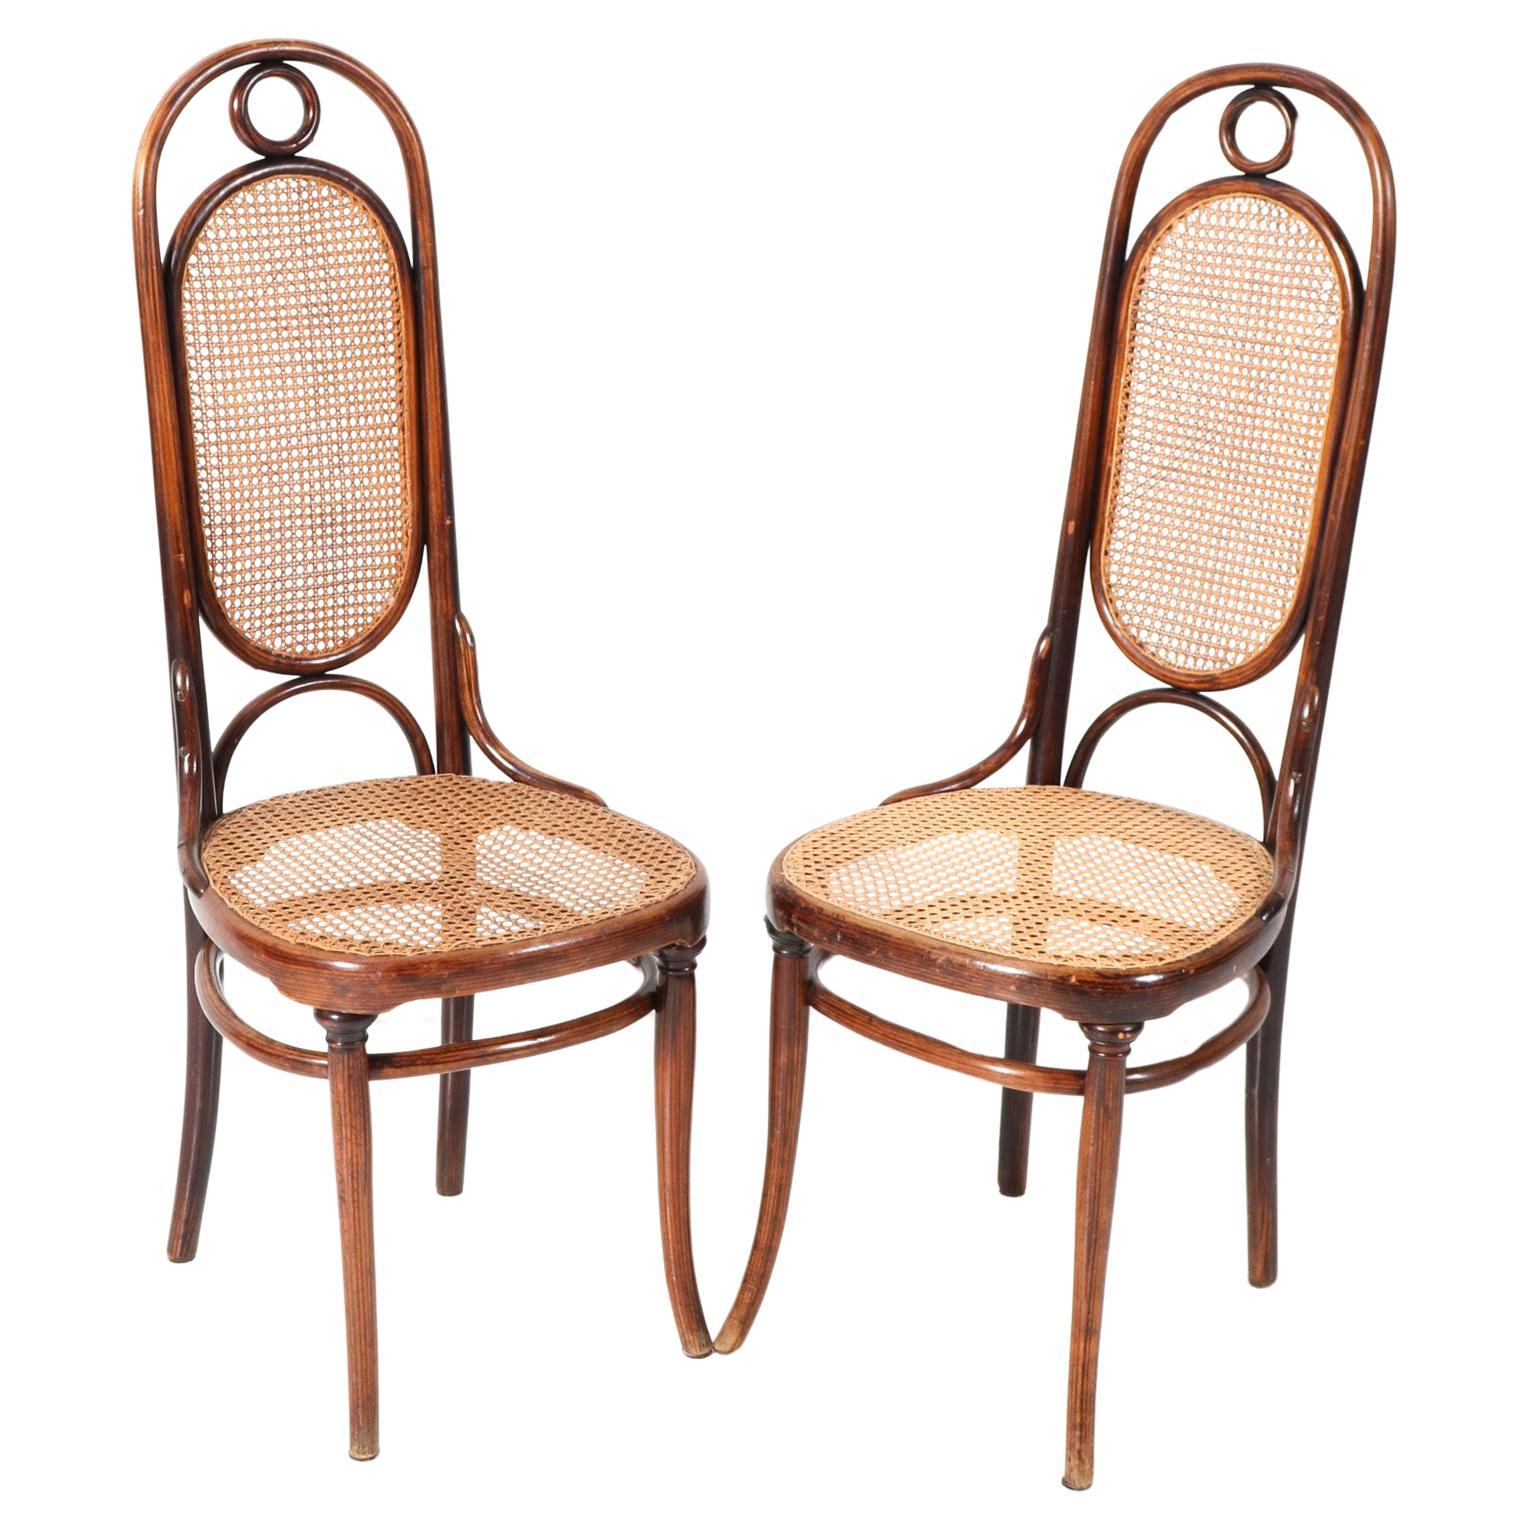 Pair of Beech Art Nouveau High Back Chairs Model 17 by Michael Thonet, 1890s For Sale